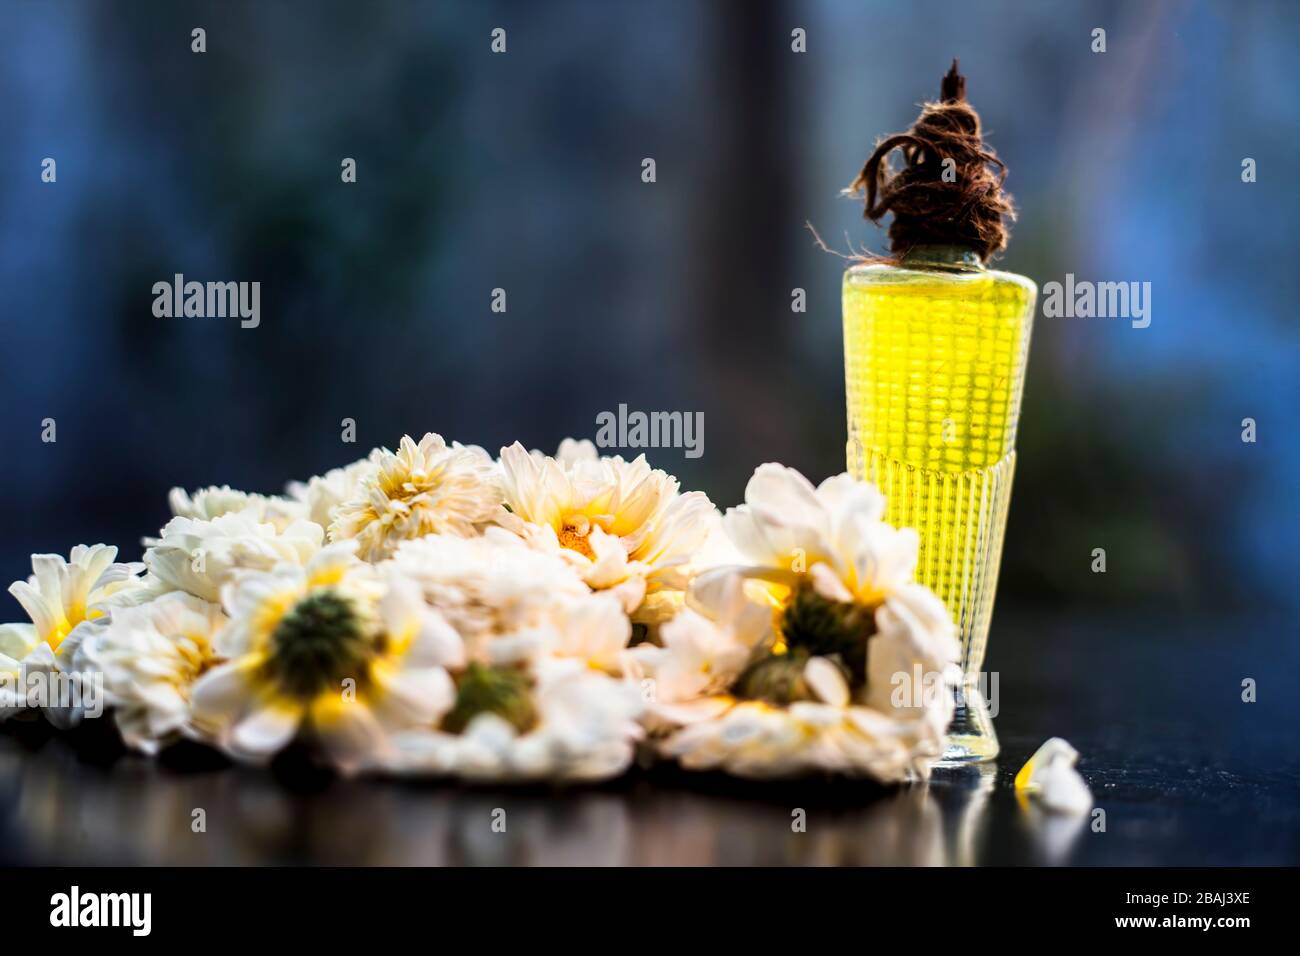 Scent or perfume of common daisy or English daisy in a glass bottle along with some daisy flowers on a black wooden board, with blurred background and Stock Photo